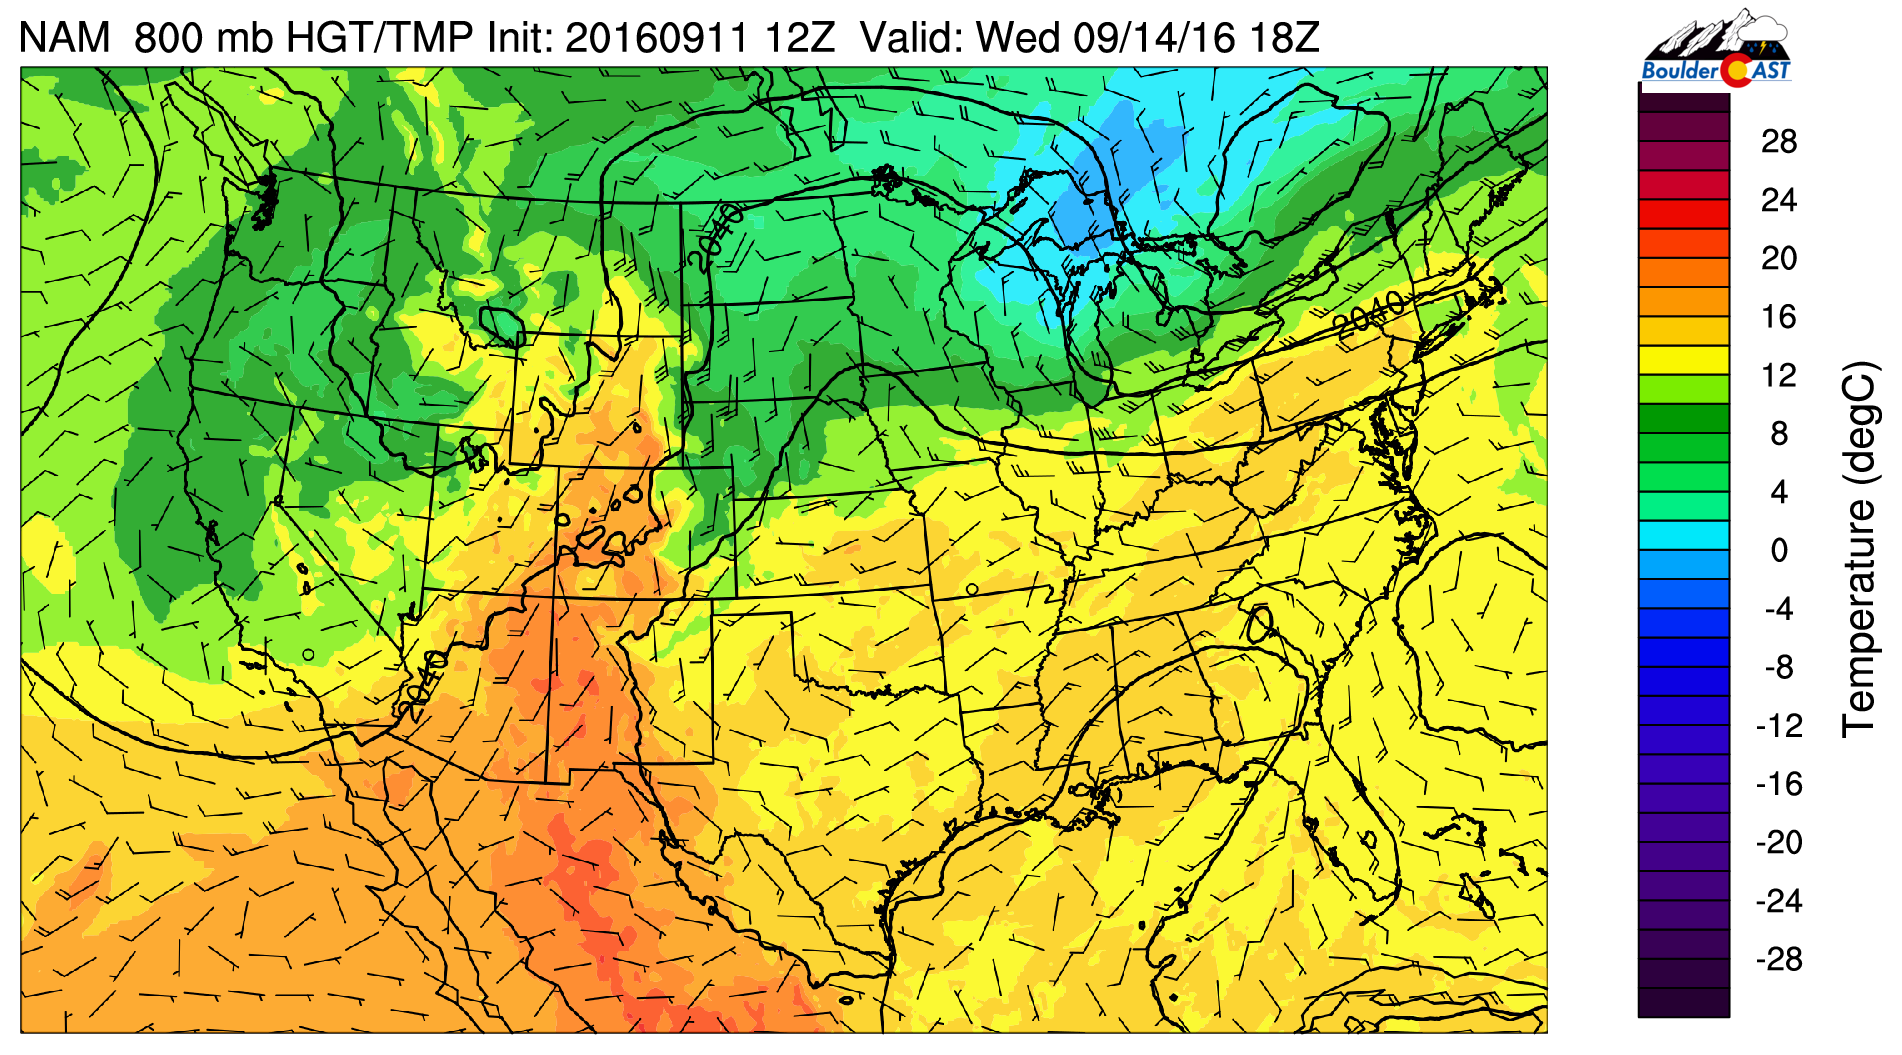 NAM 800 temperatures and winds for Wednesday